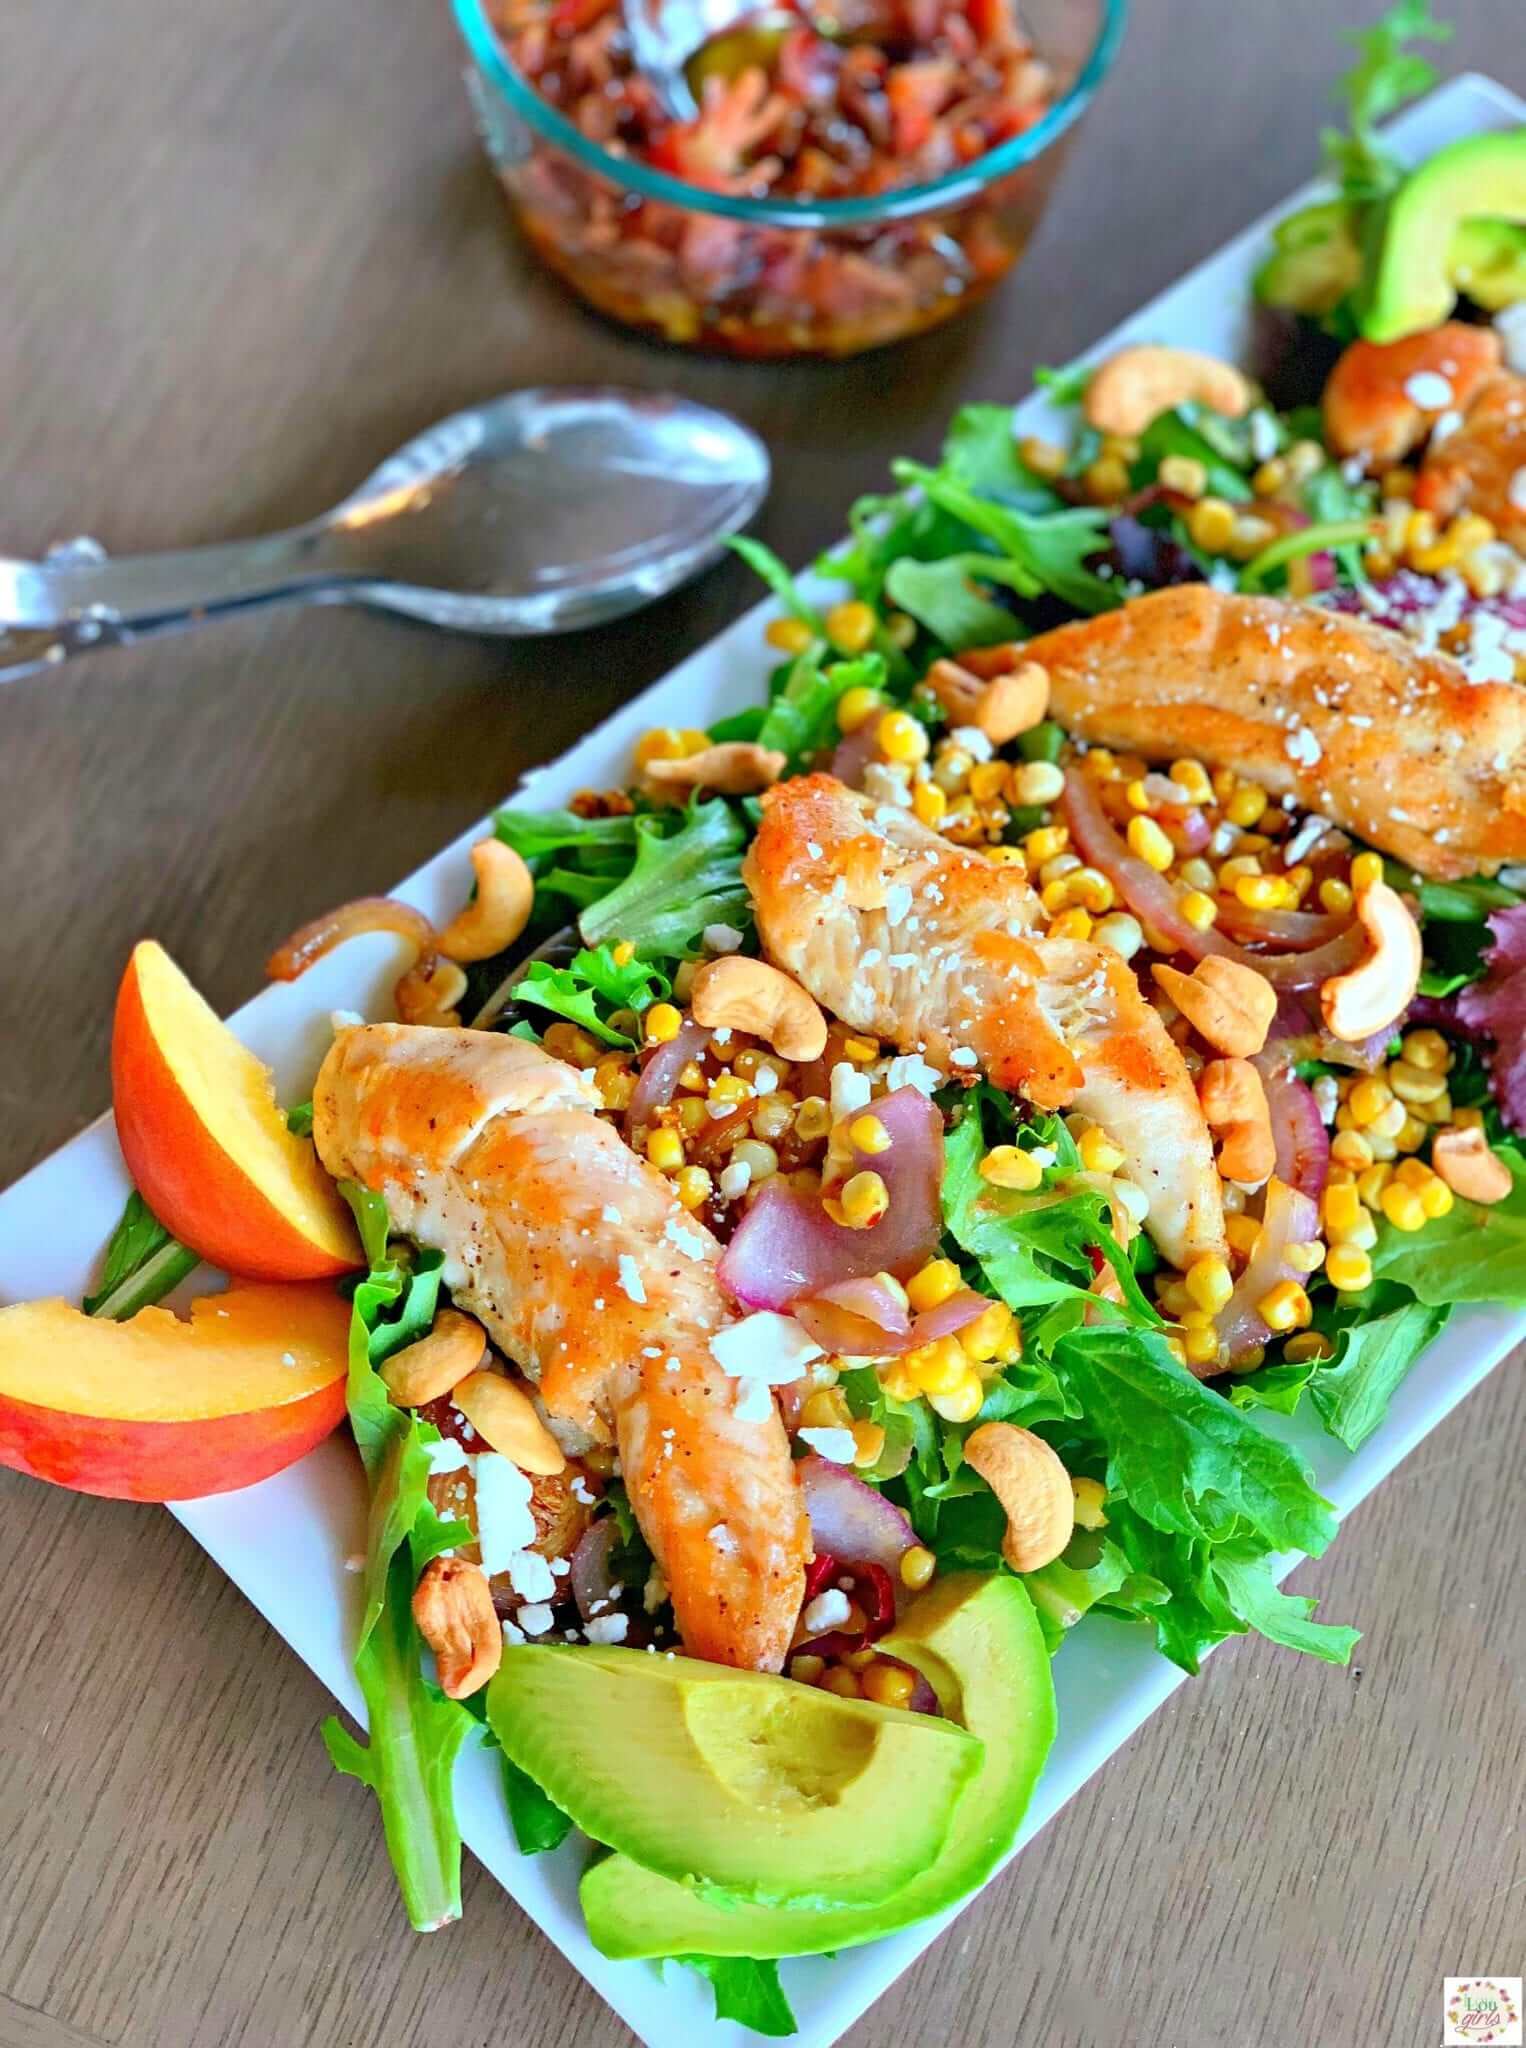 Peach Chicken and Caramelized Corn Salad